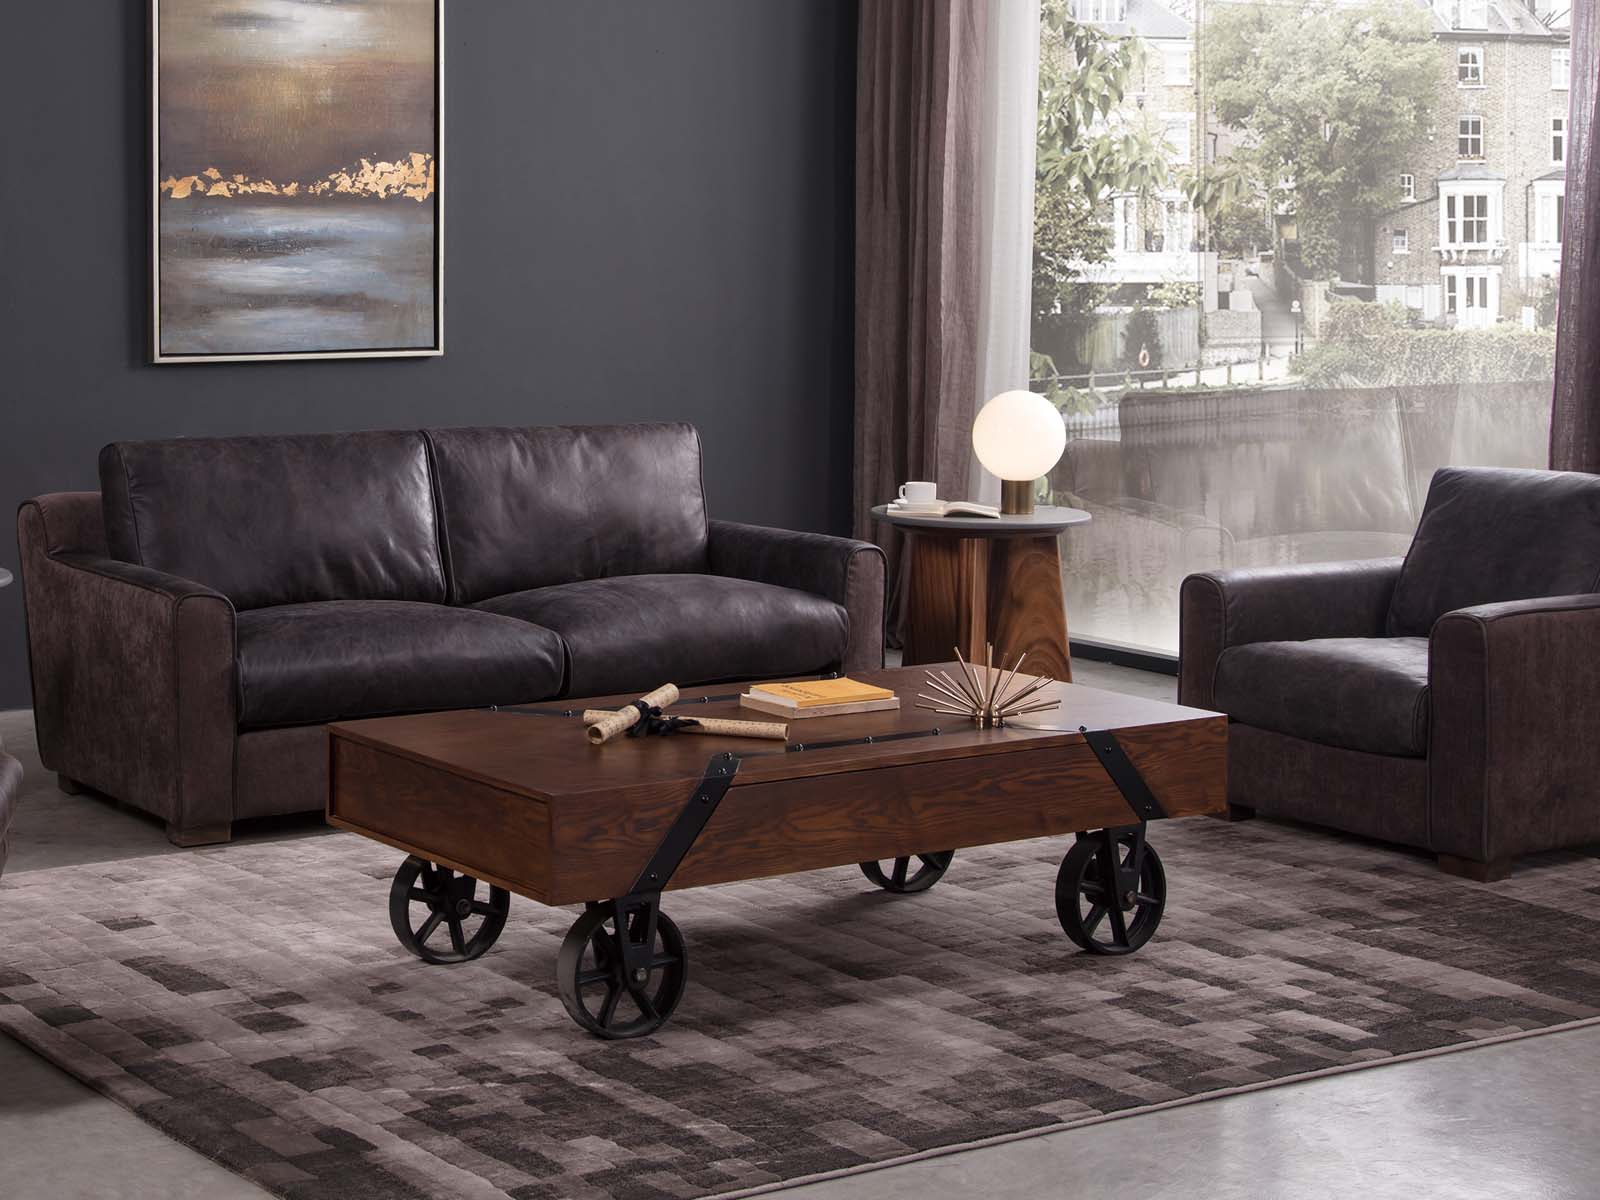 Luxury Rustic Wood Coffee Table with Casters